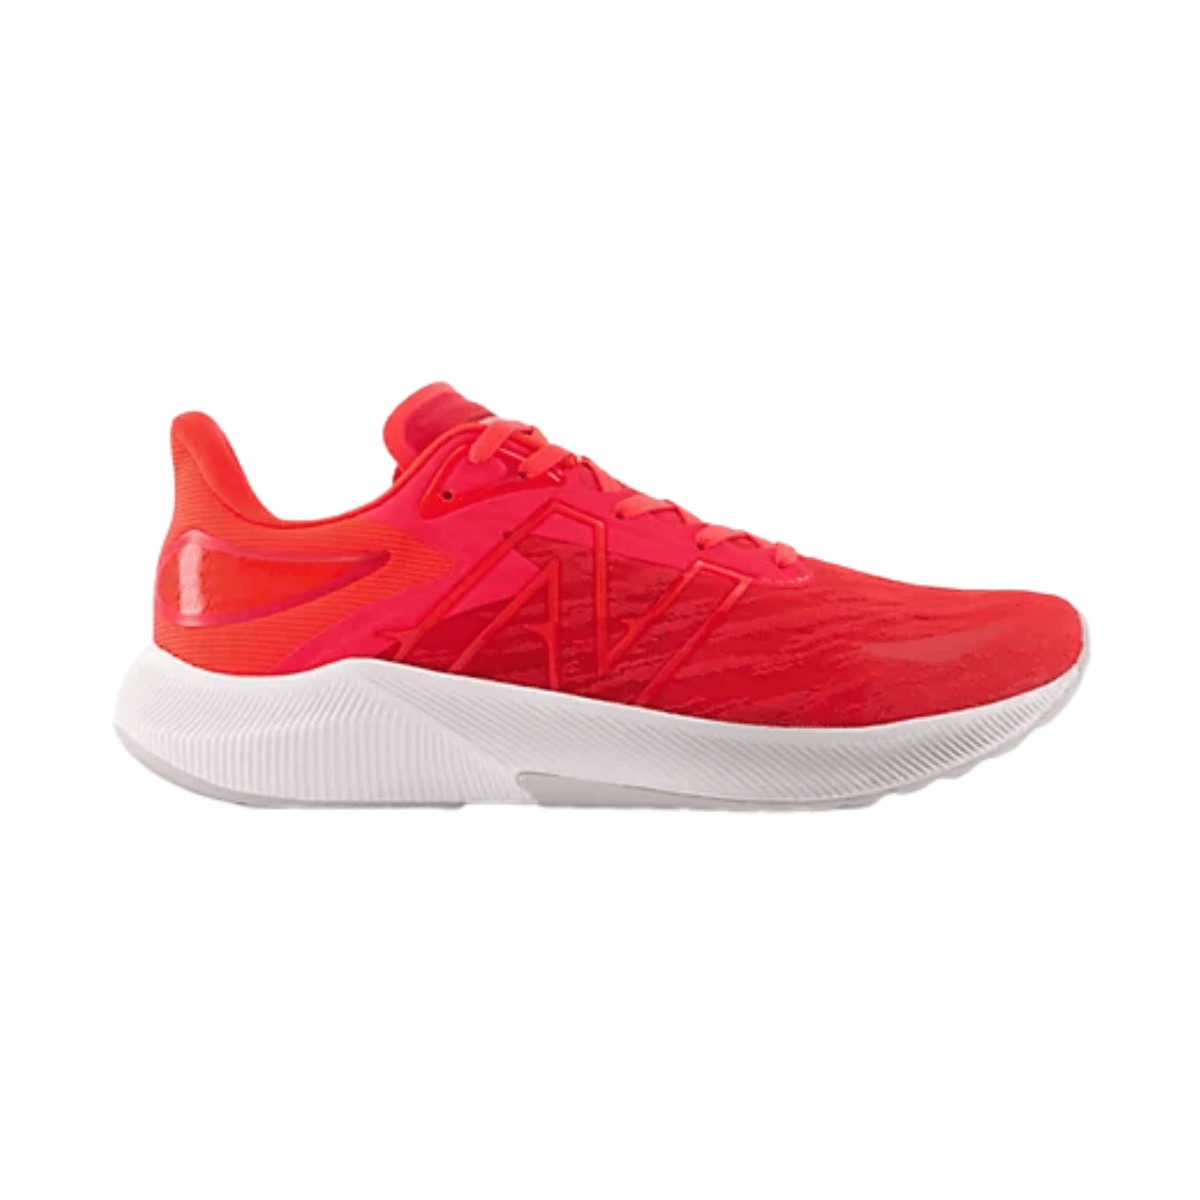 New Balance FuelCell Propel V3 Shoes Red White AW22, Size 42 - EUR